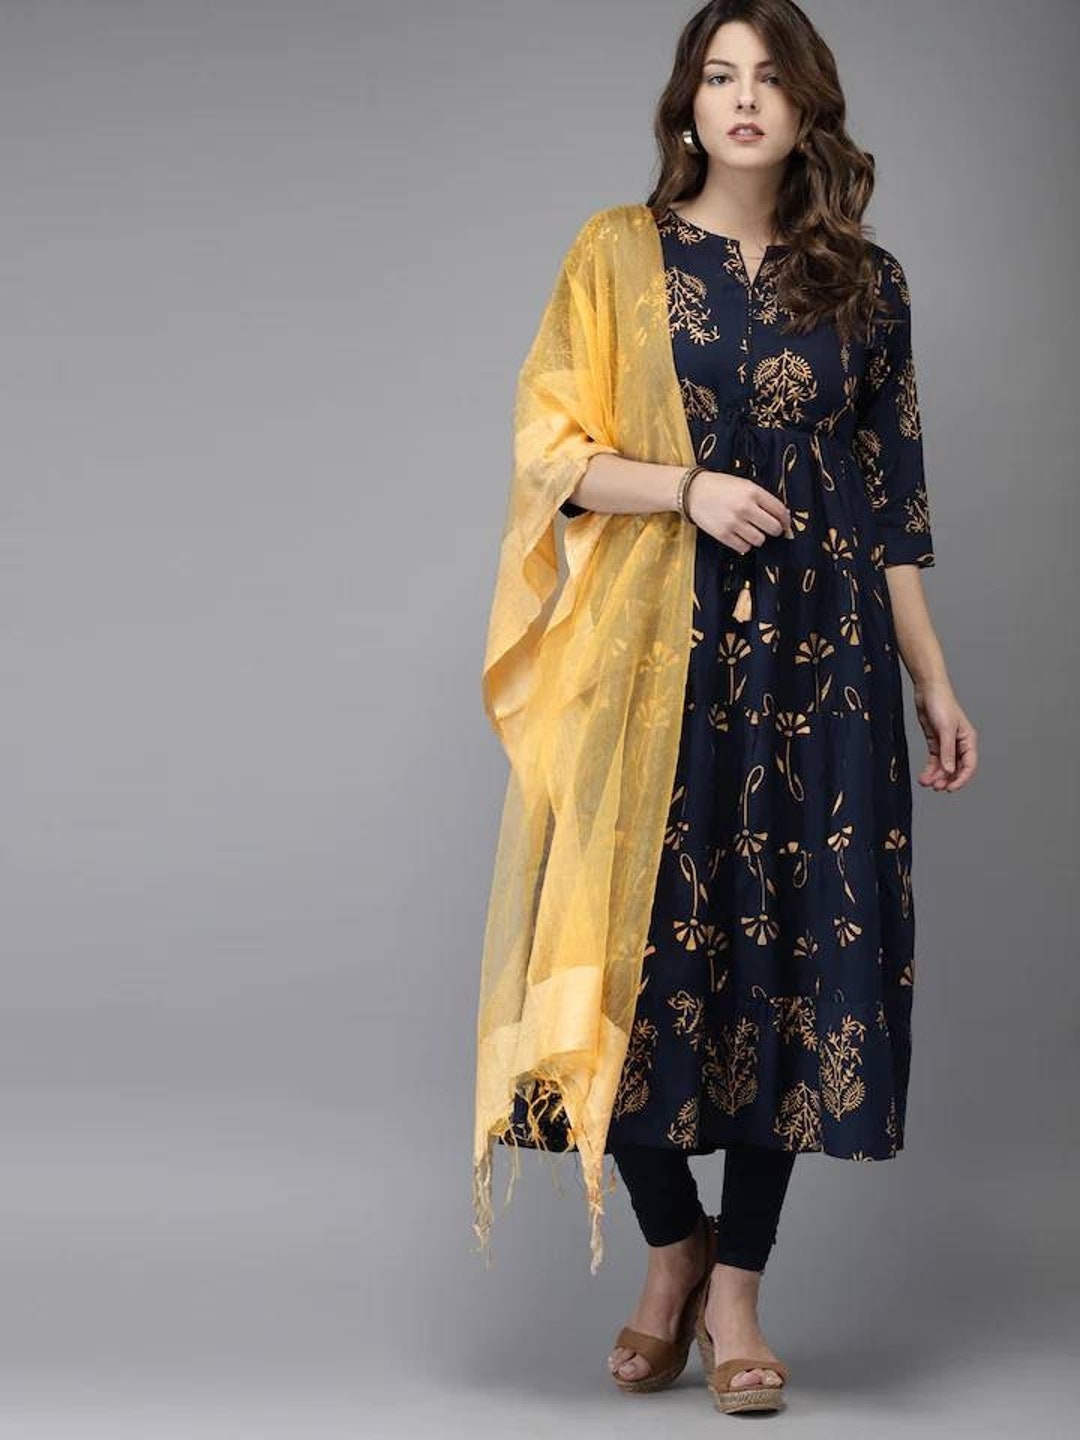 Looking for W Kurtis to Buy Online? Our Pick of the 10 Latest and Most  Alluring Kurti Options from the Brand (2019)